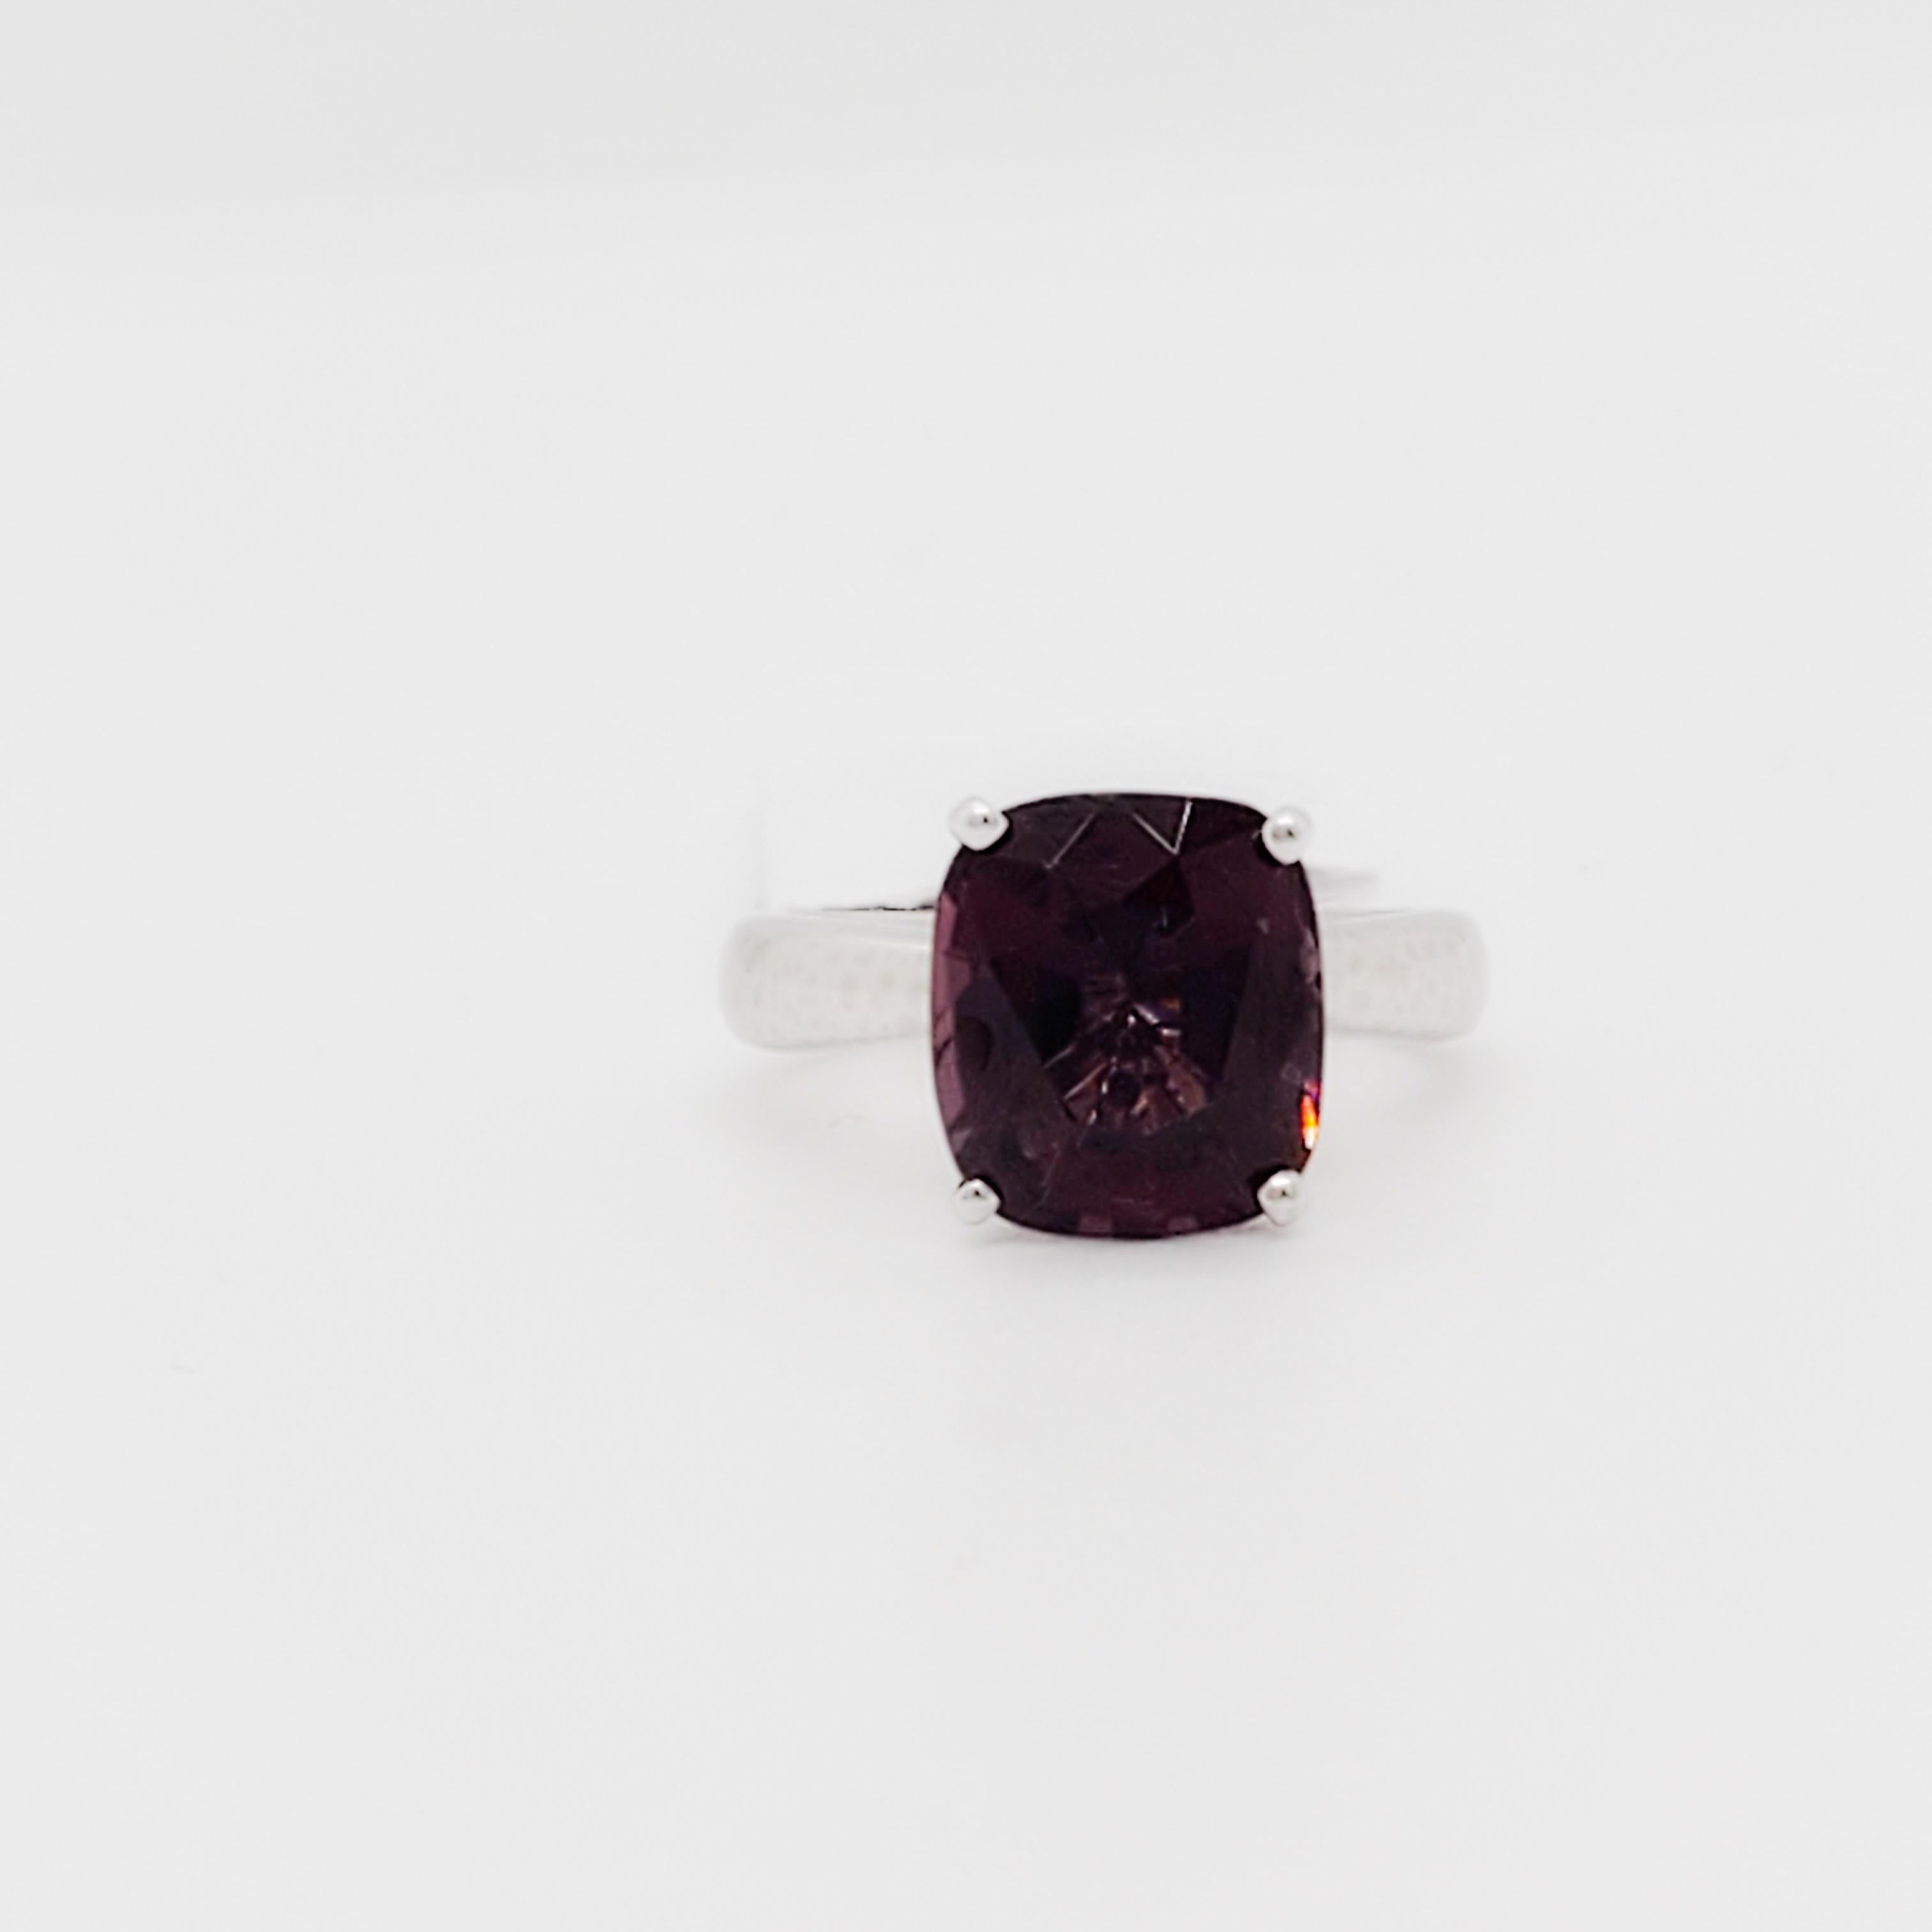 Beautiful deep red spinel cushion weighing 4.78 ct.  Handmade 14k white gold mounting.  Ring size 5.25.